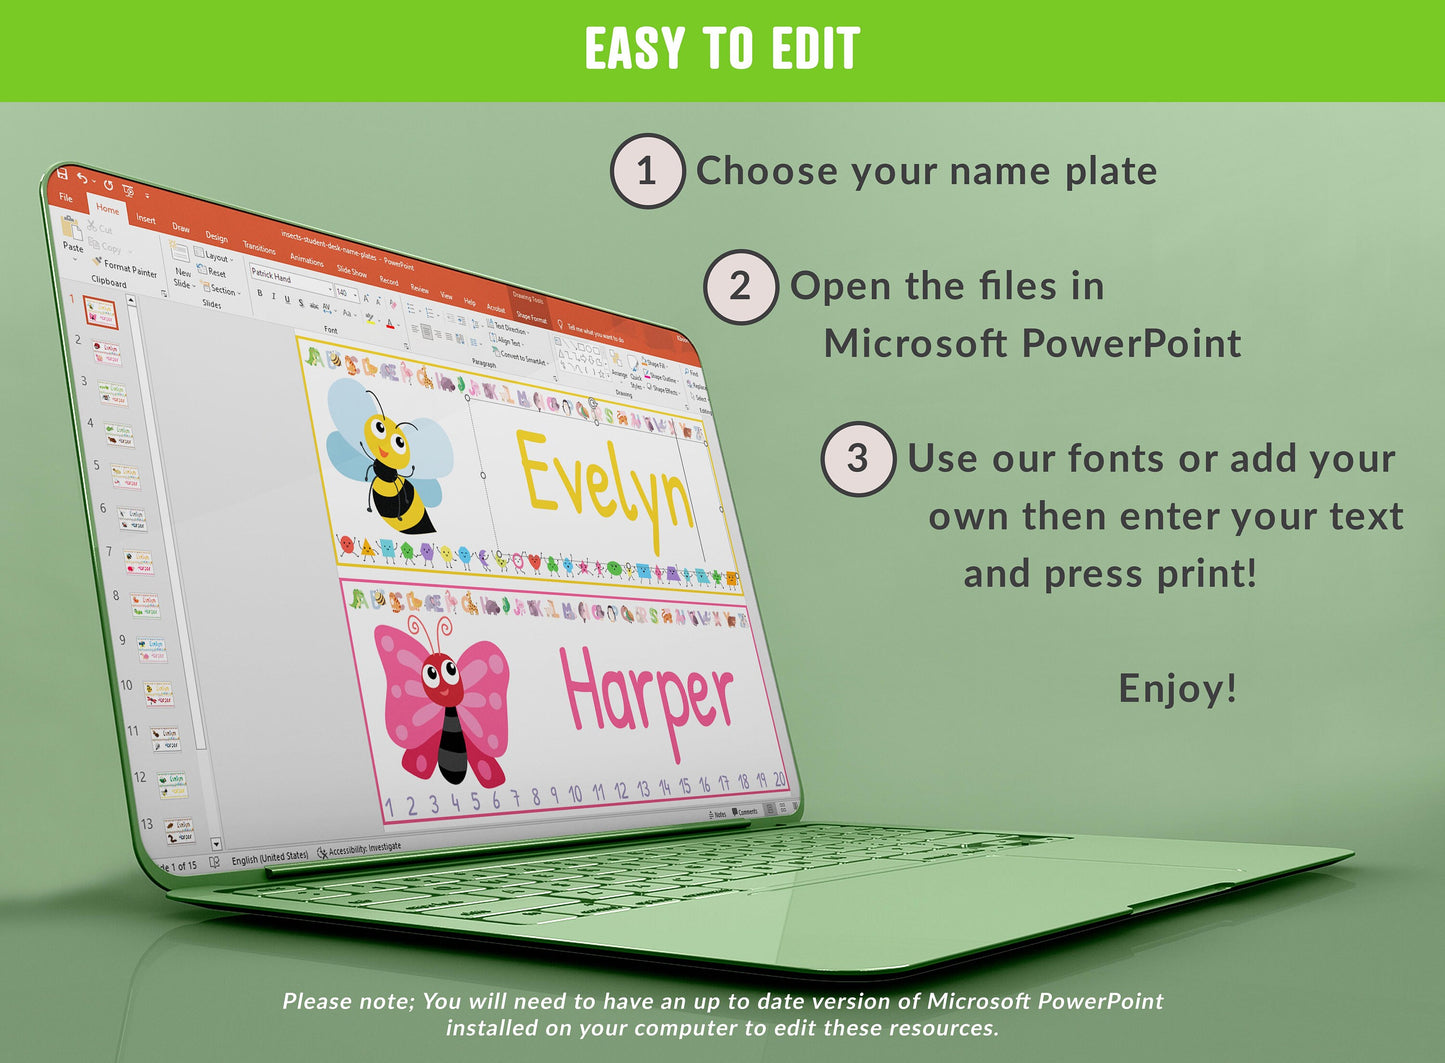 Student Desk Plates, 30 Printable/Editable Cute Insects Classroom Name Tags & Name Plates for Student; a Helpful Addition to Your Classroom